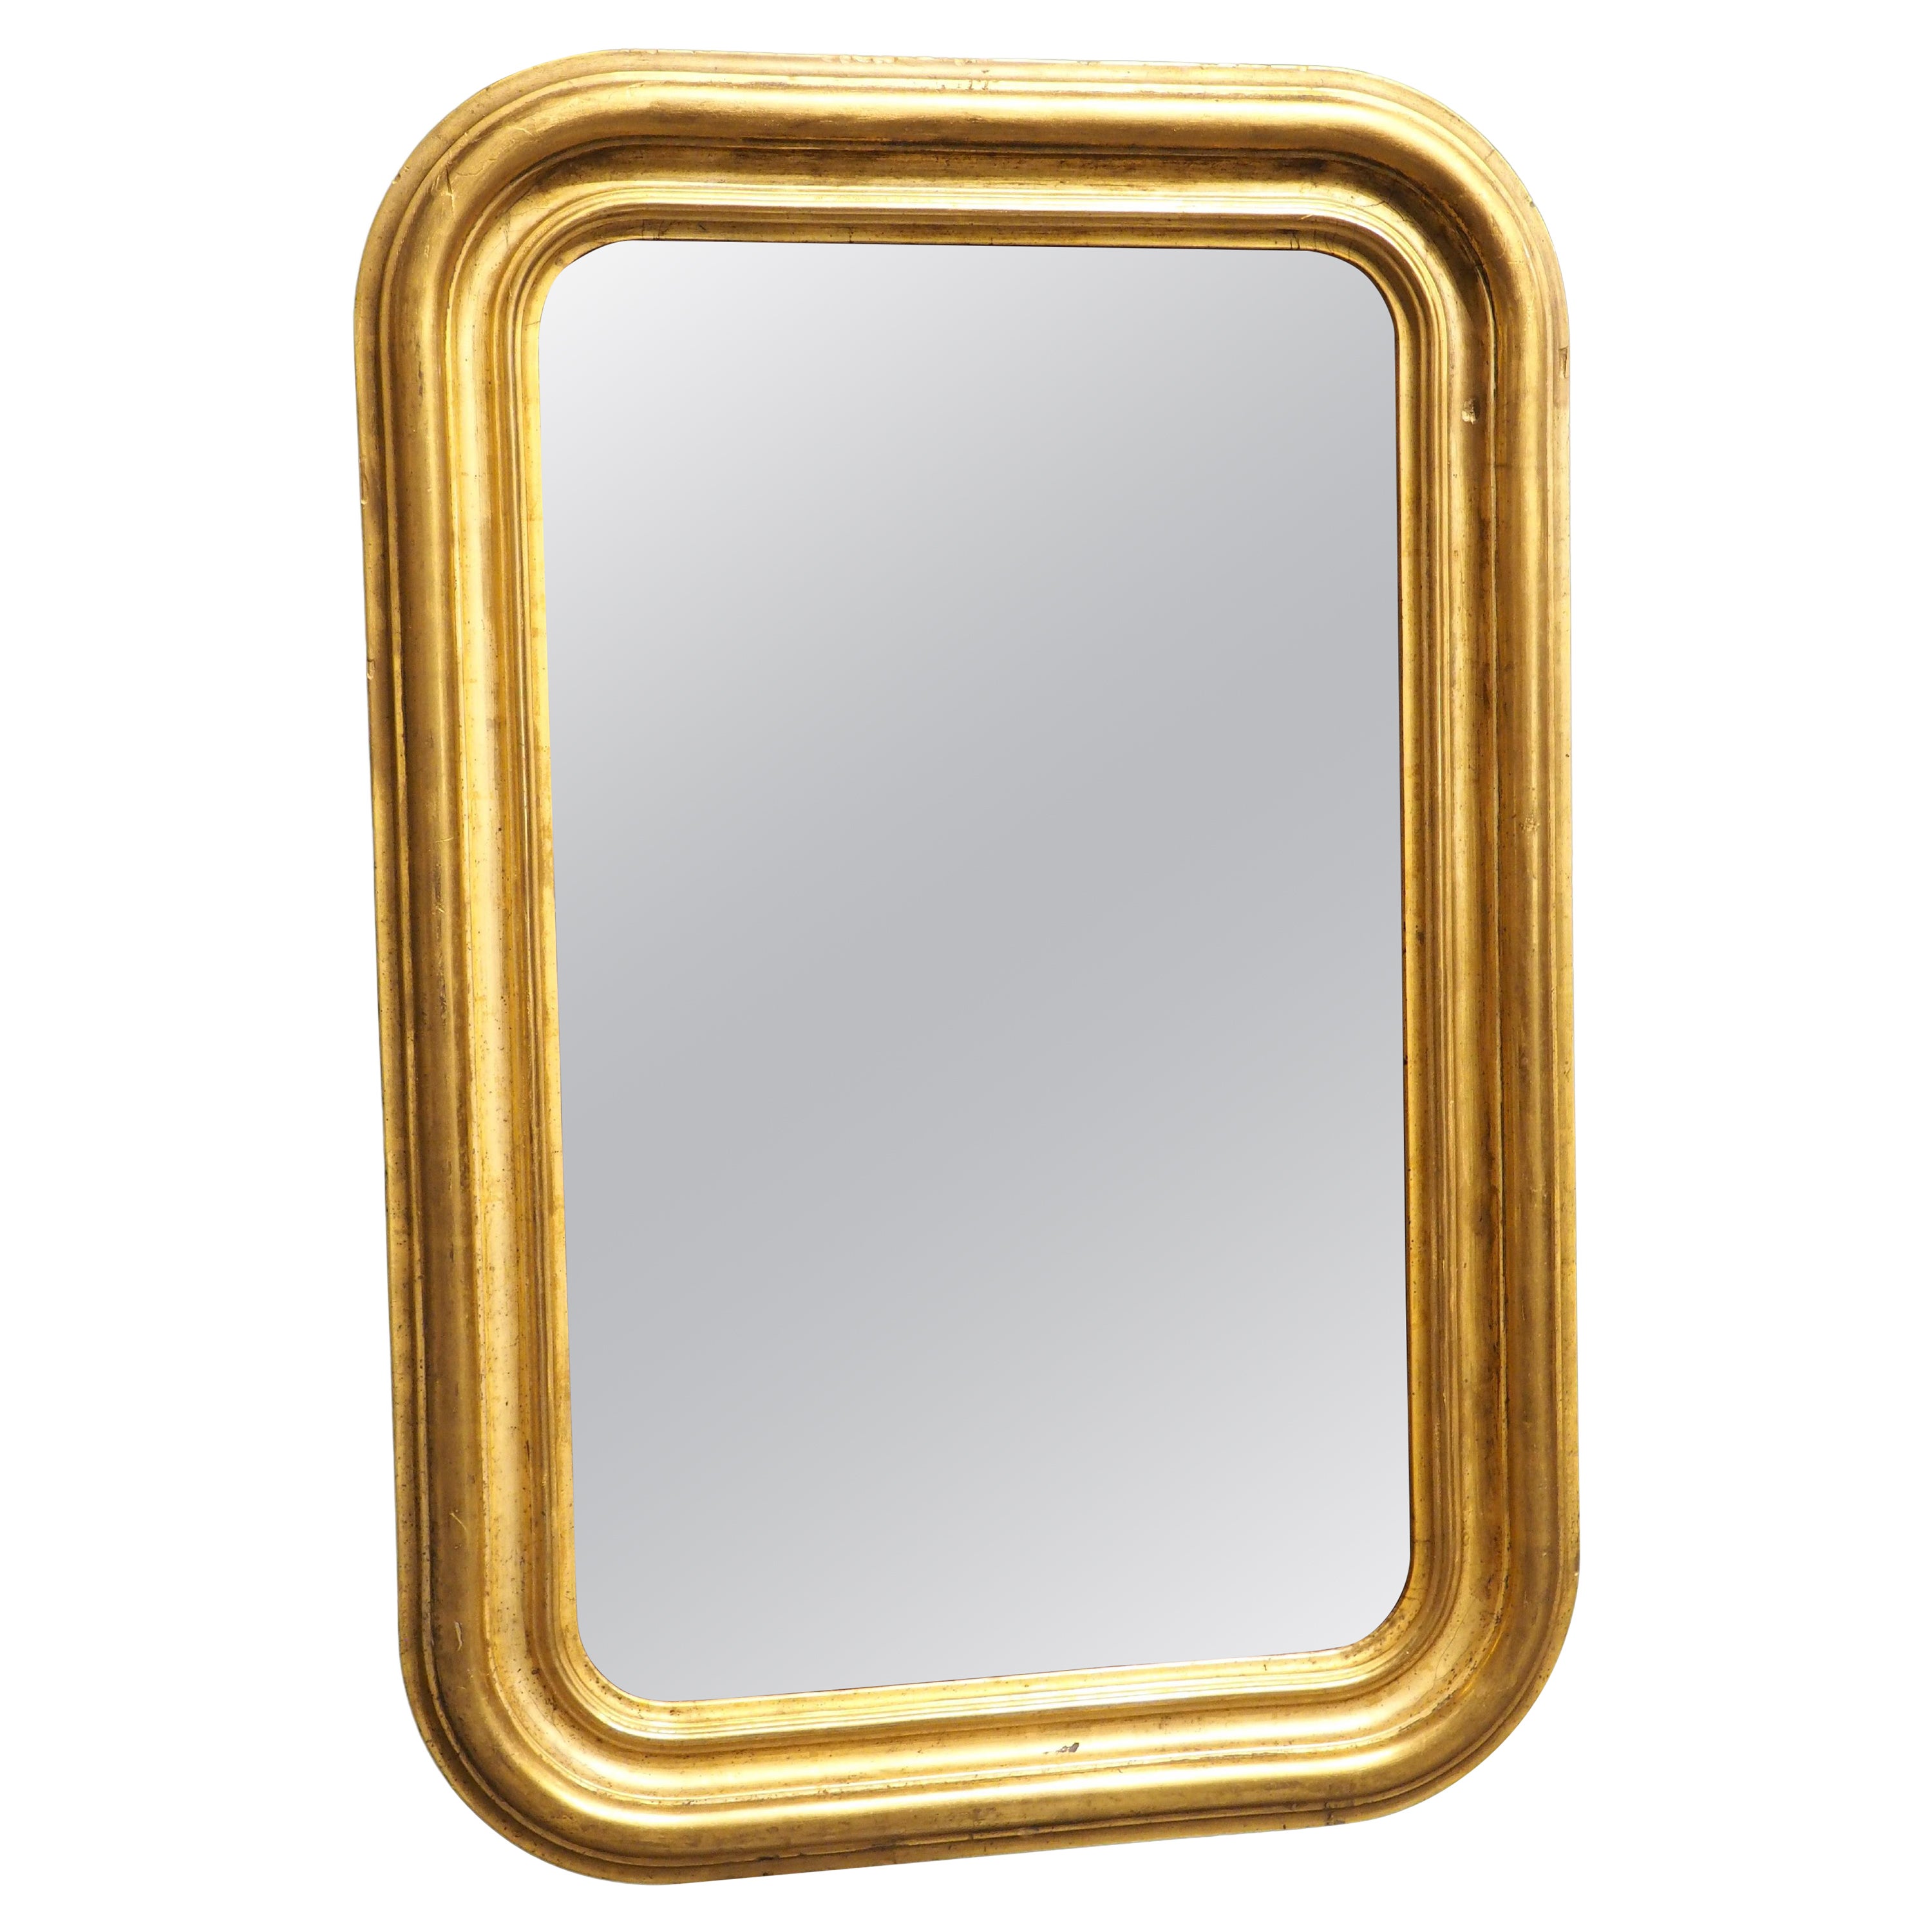 Circa 1850 Antique Giltwood Louis Philippe Mirror from France